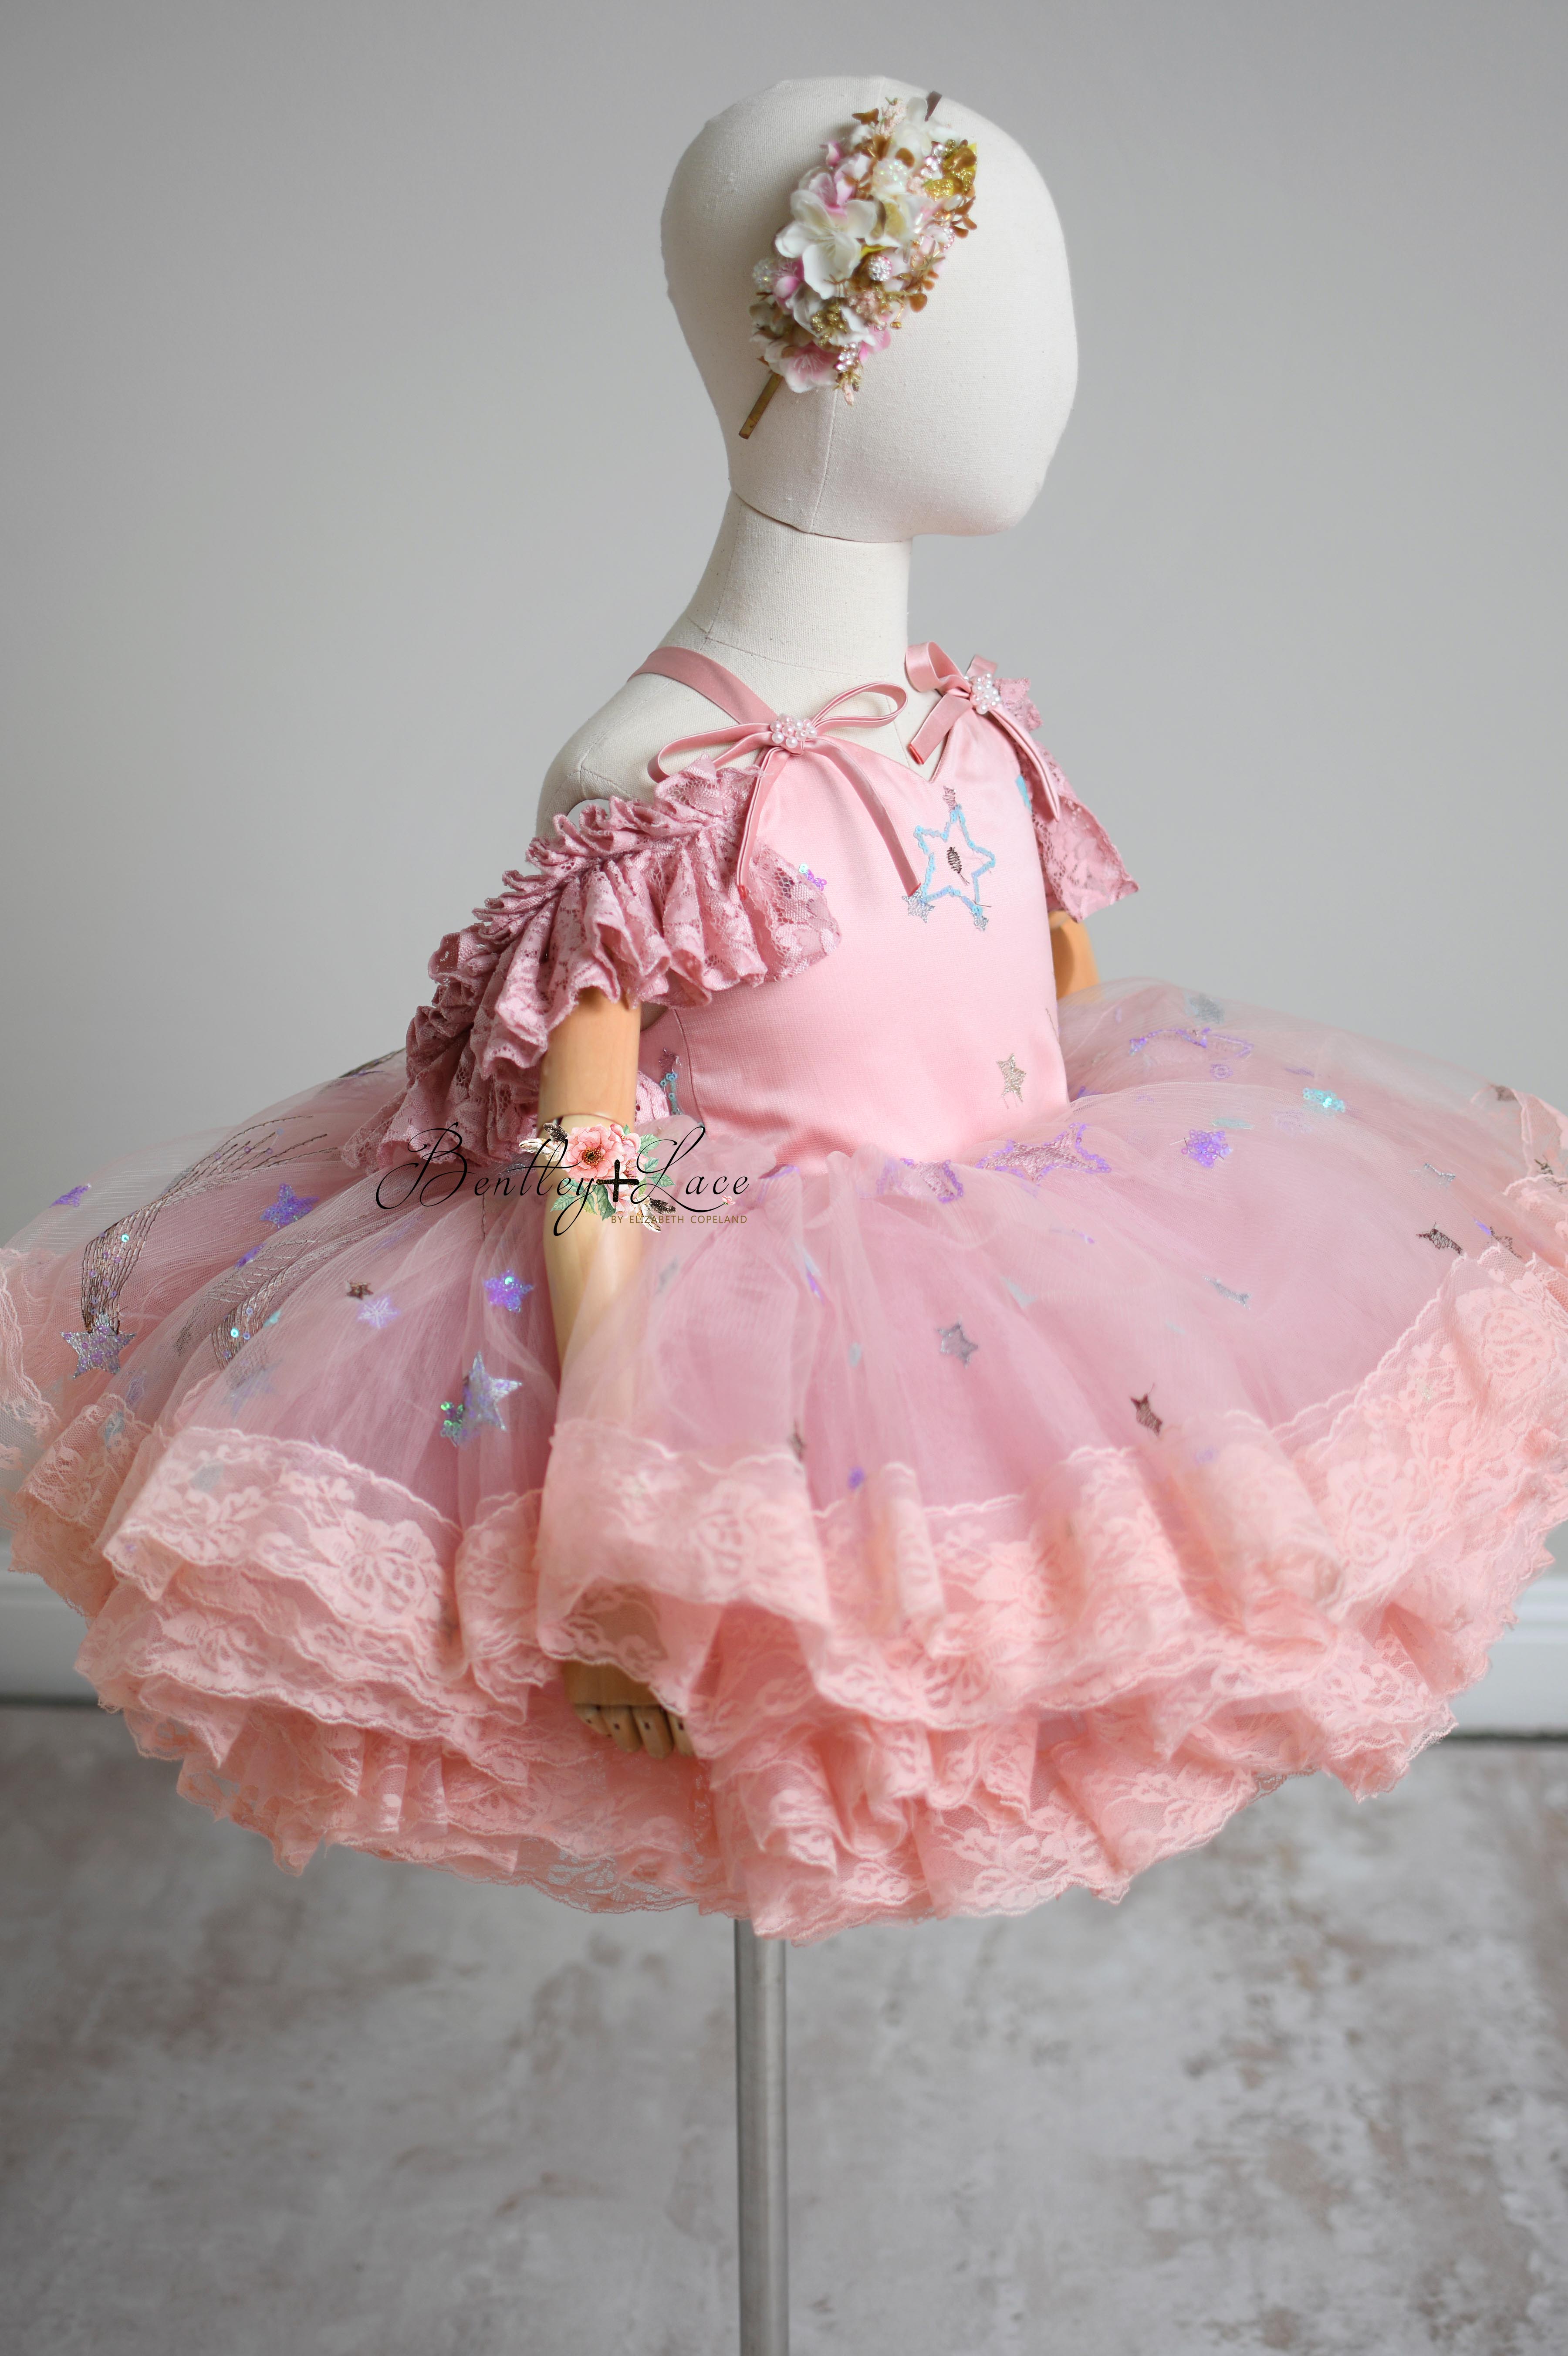 children's gowns for photography sessions